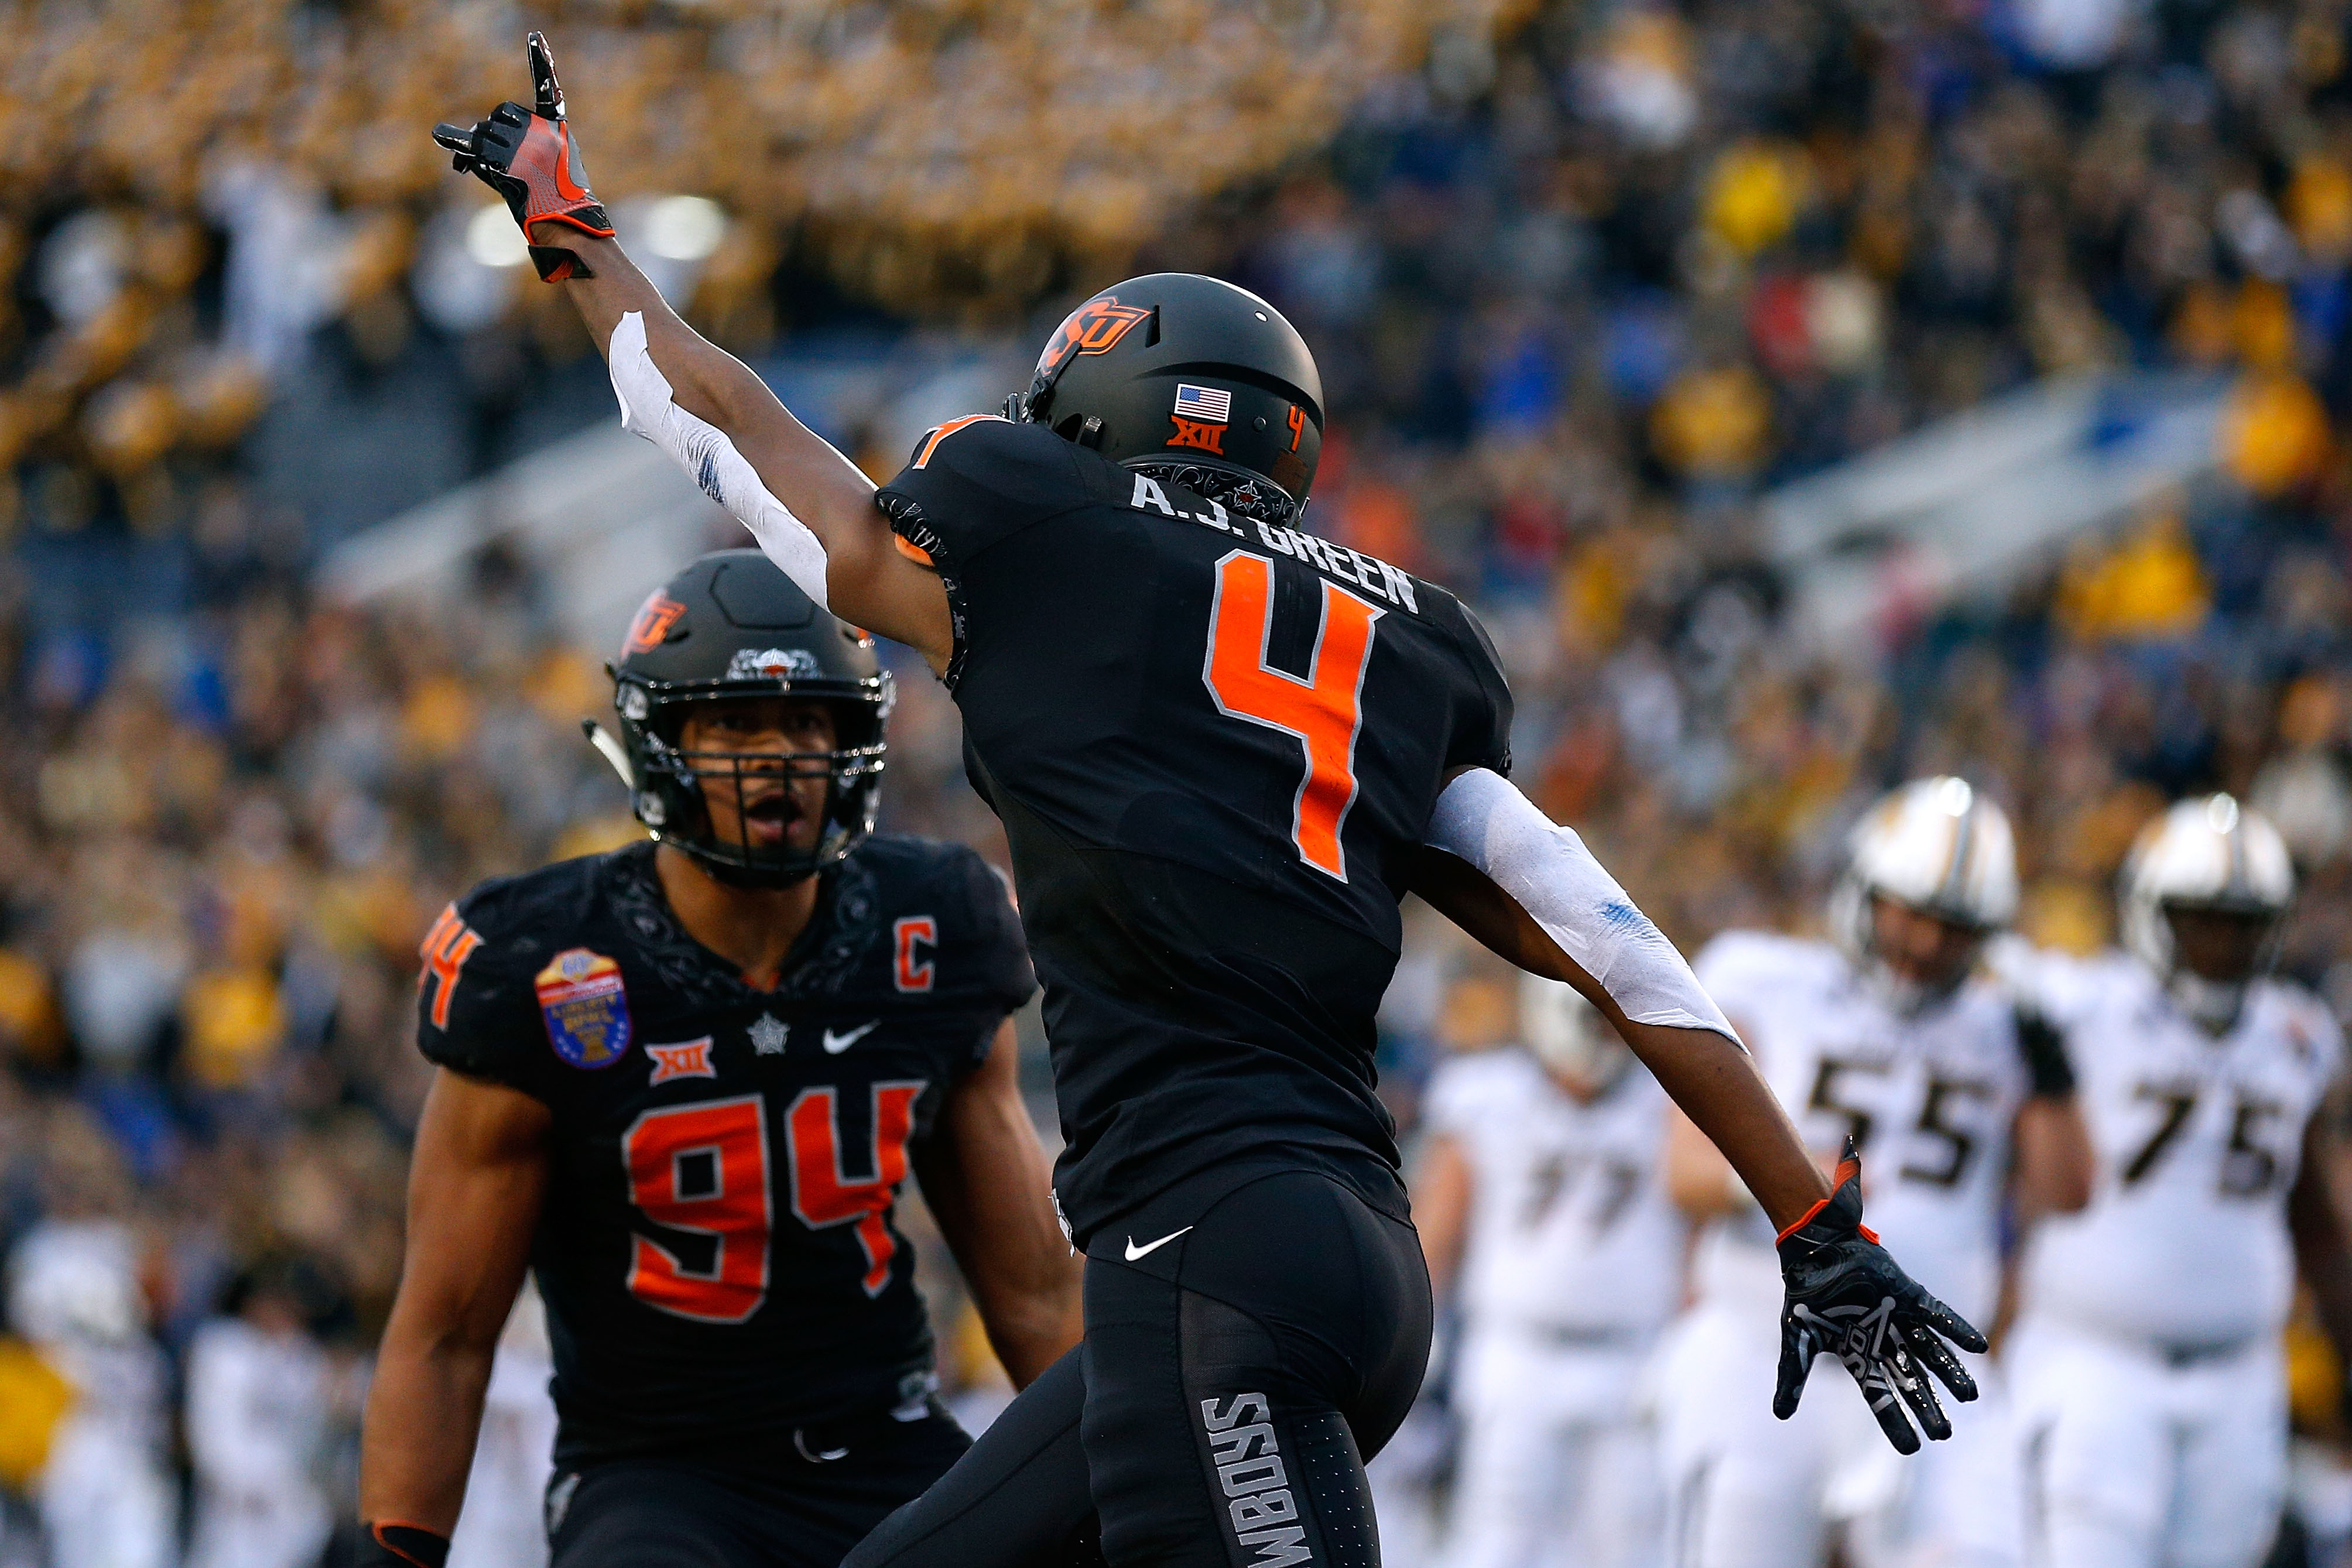 Oklahoma State’s Path to the Top 25 Is Shaping Up | Heavy.com